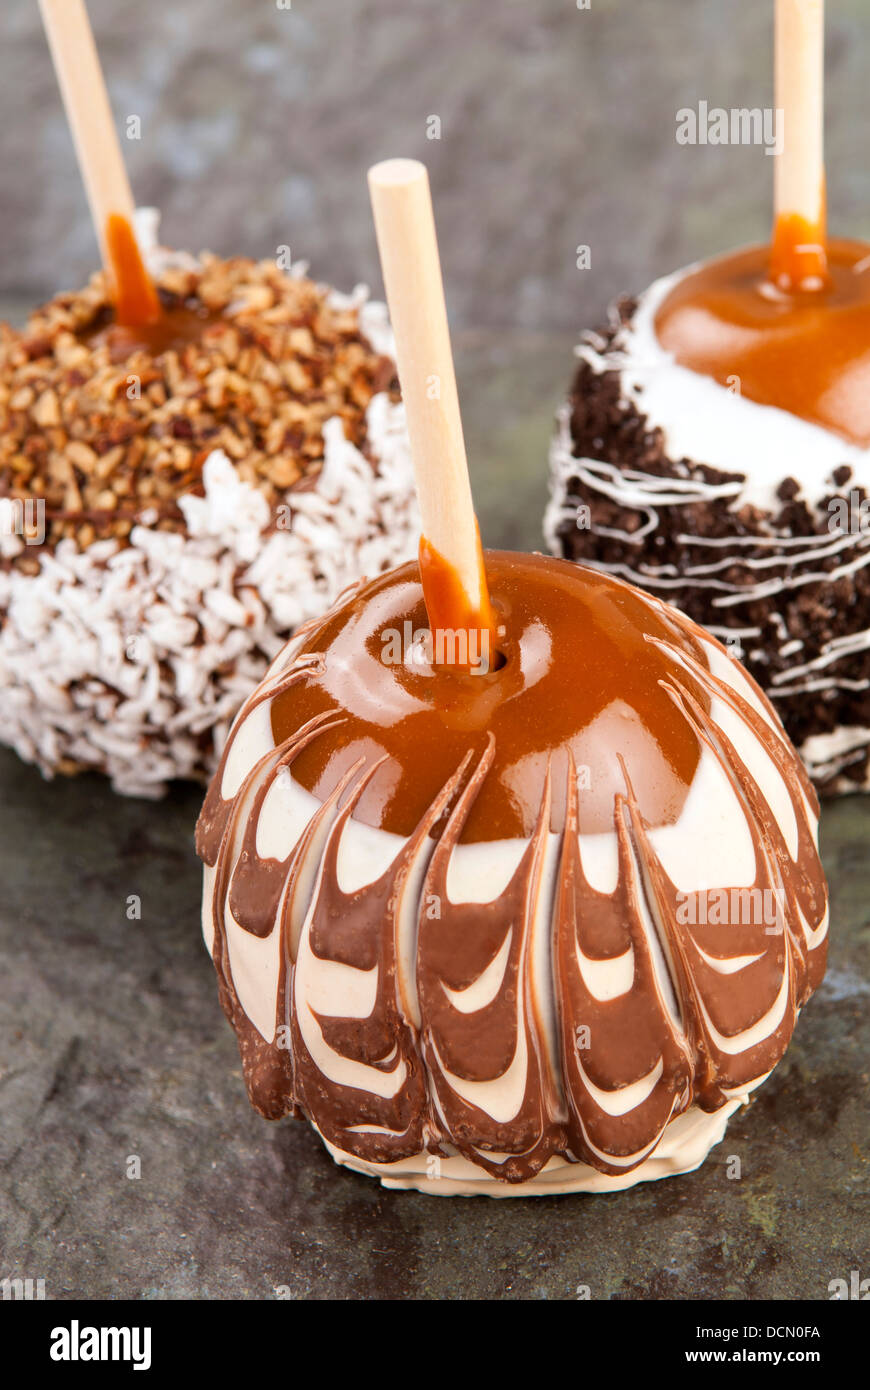 Delicious taffy apples decorated with swirls, nuts and chocolate Stock Photo